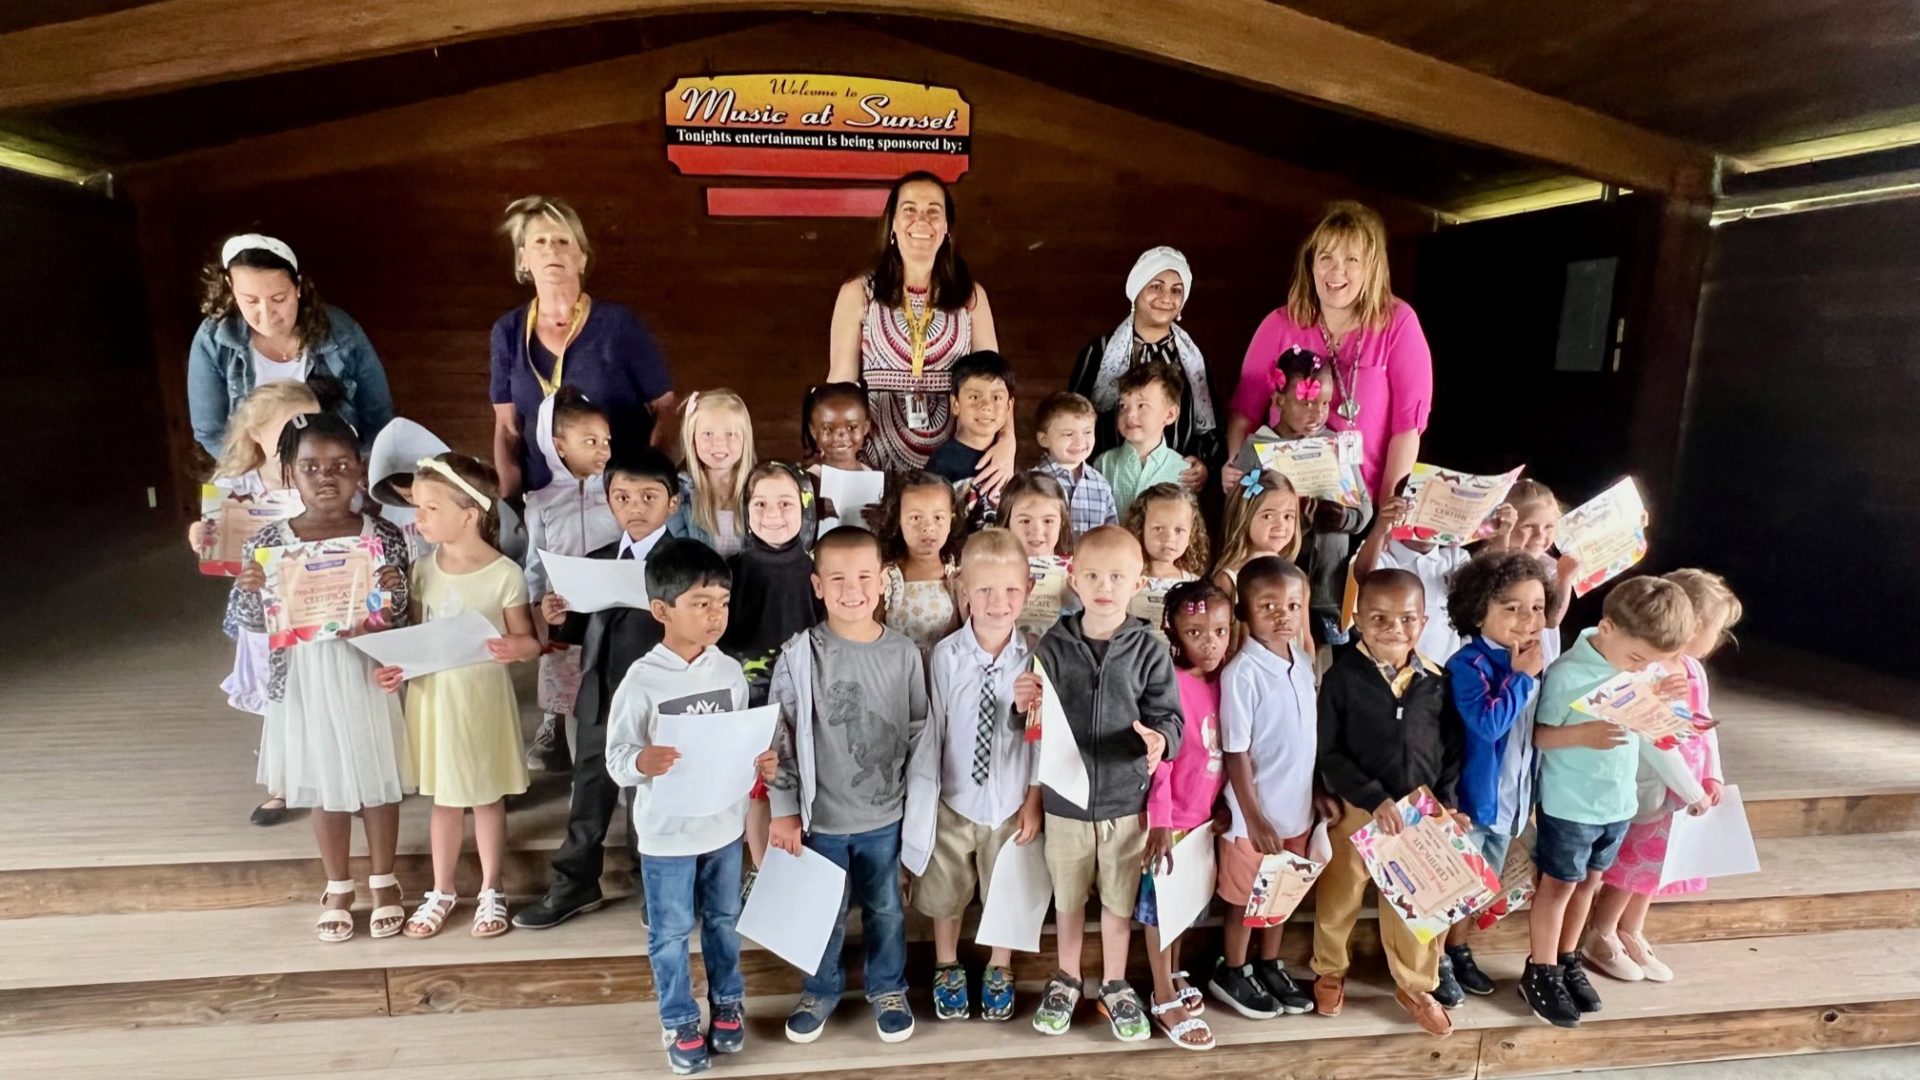 approximately 20 pre-kindergaten students holding certificates and pictures with five female adults standing behind them